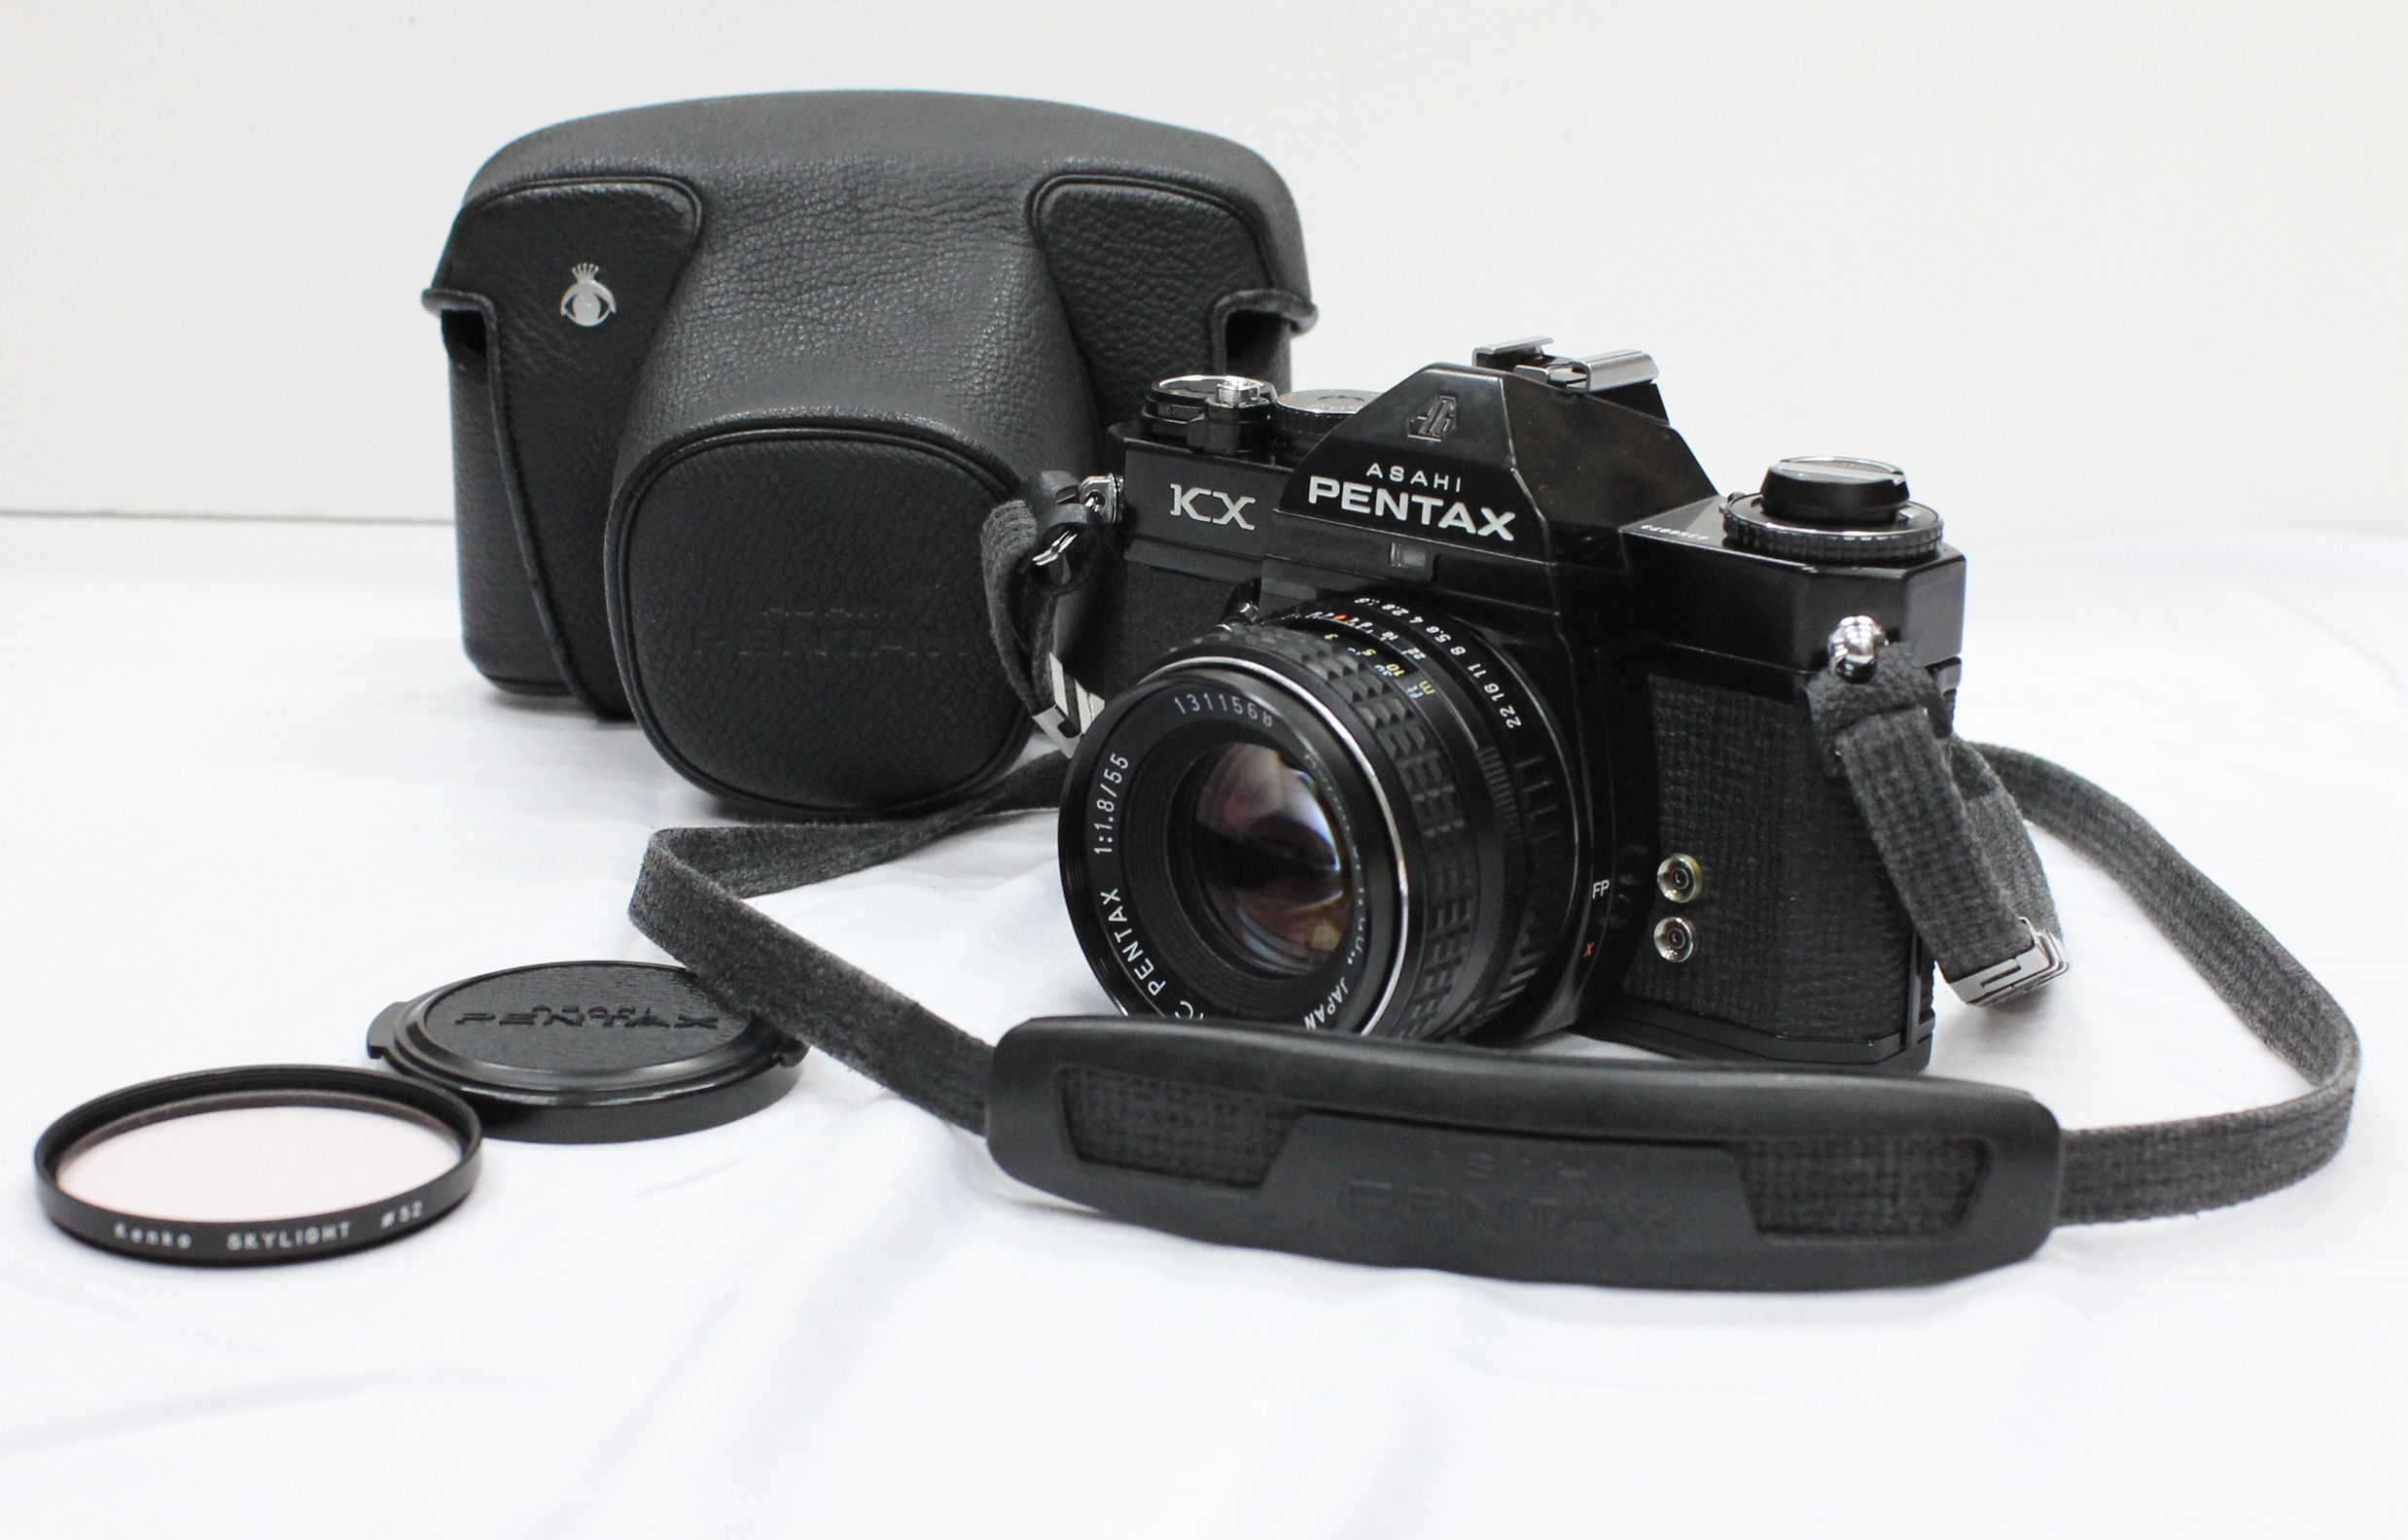 Japan Used Camera Shop | [EX+++++] Pentax KX Body with SMC PENTAX 55mm F/1.8 Lens and Filter, Camera Case and Strap from Japan